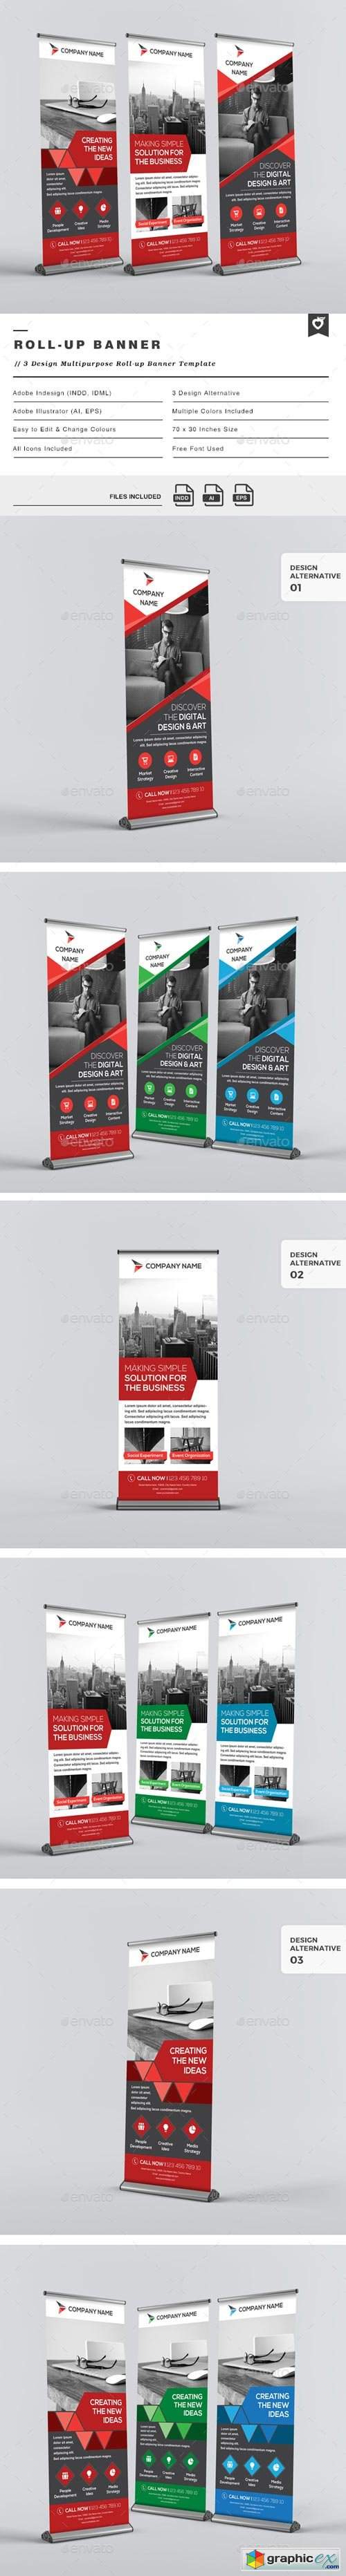 Multipurpose Roll-up Banners